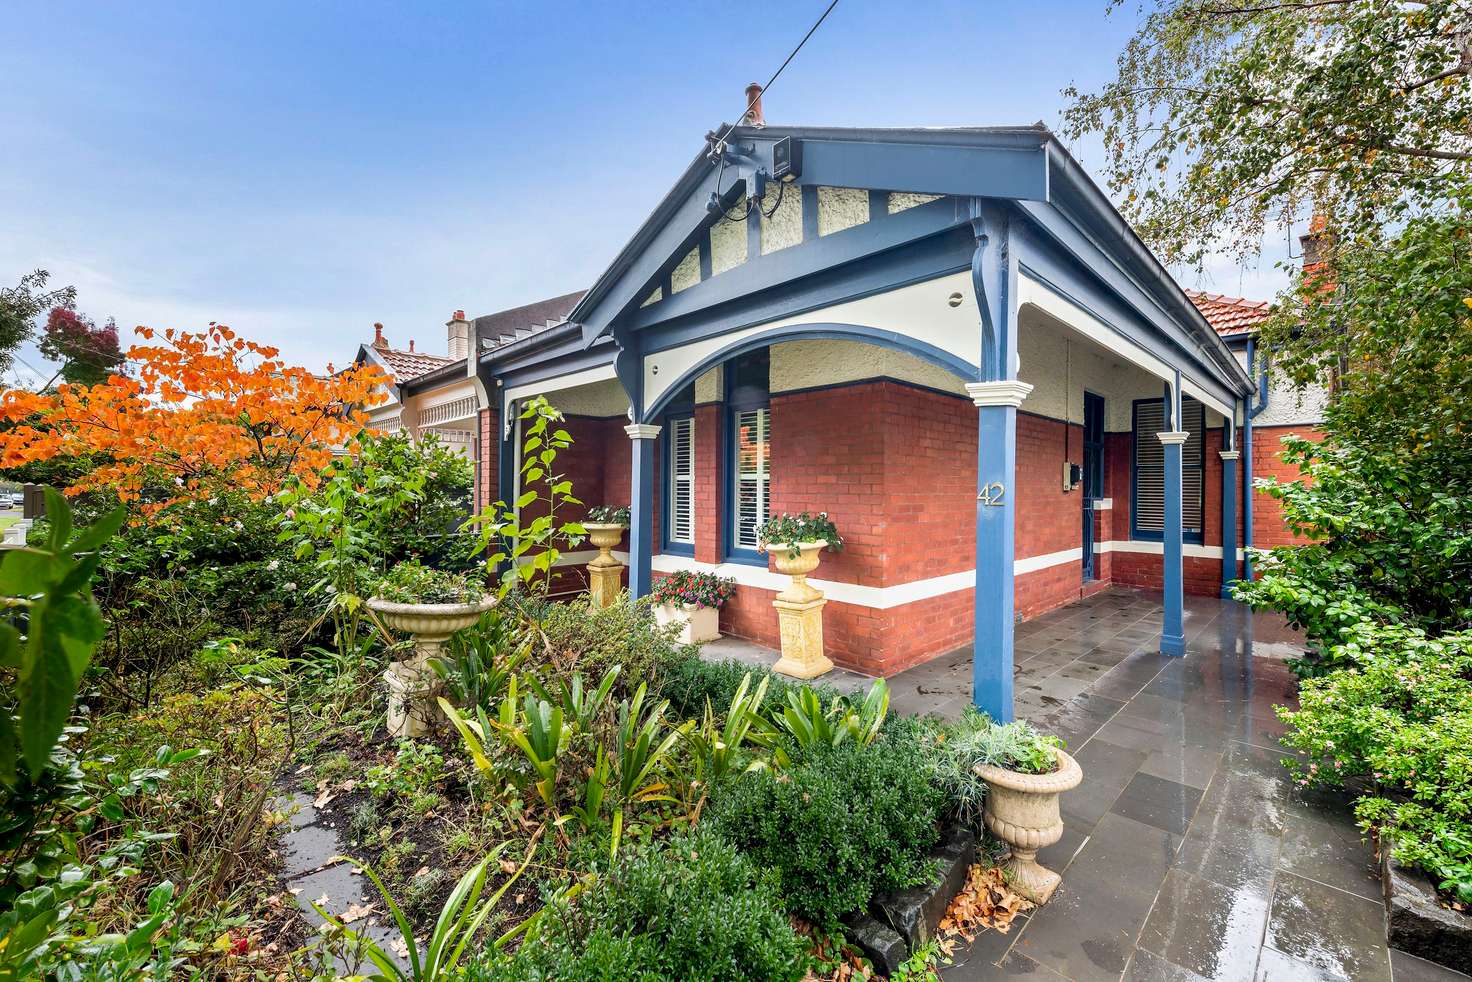 Main view of Homely house listing, 42 Armadale Street, Armadale VIC 3143